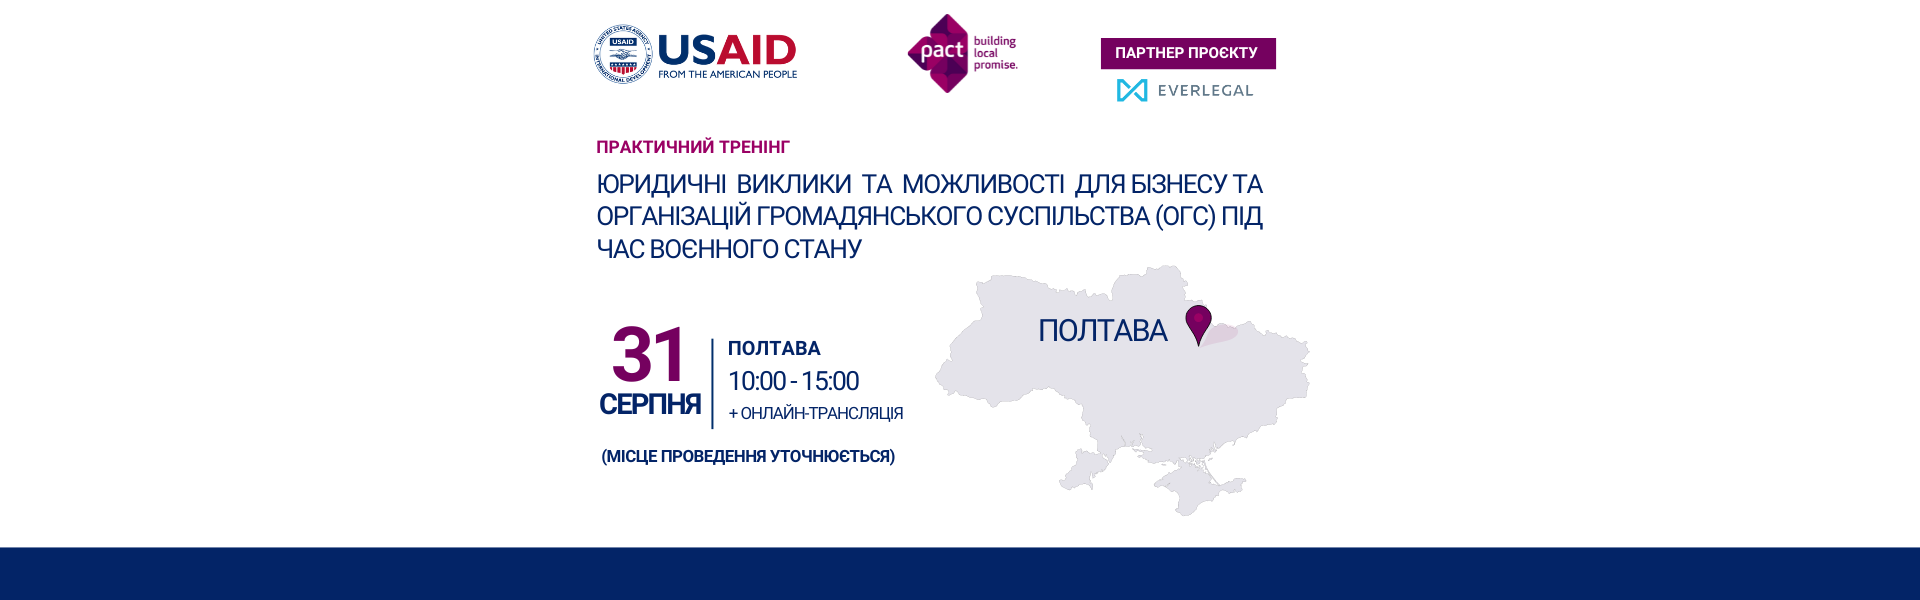 Practical training for business and civil society organisations in Poltava